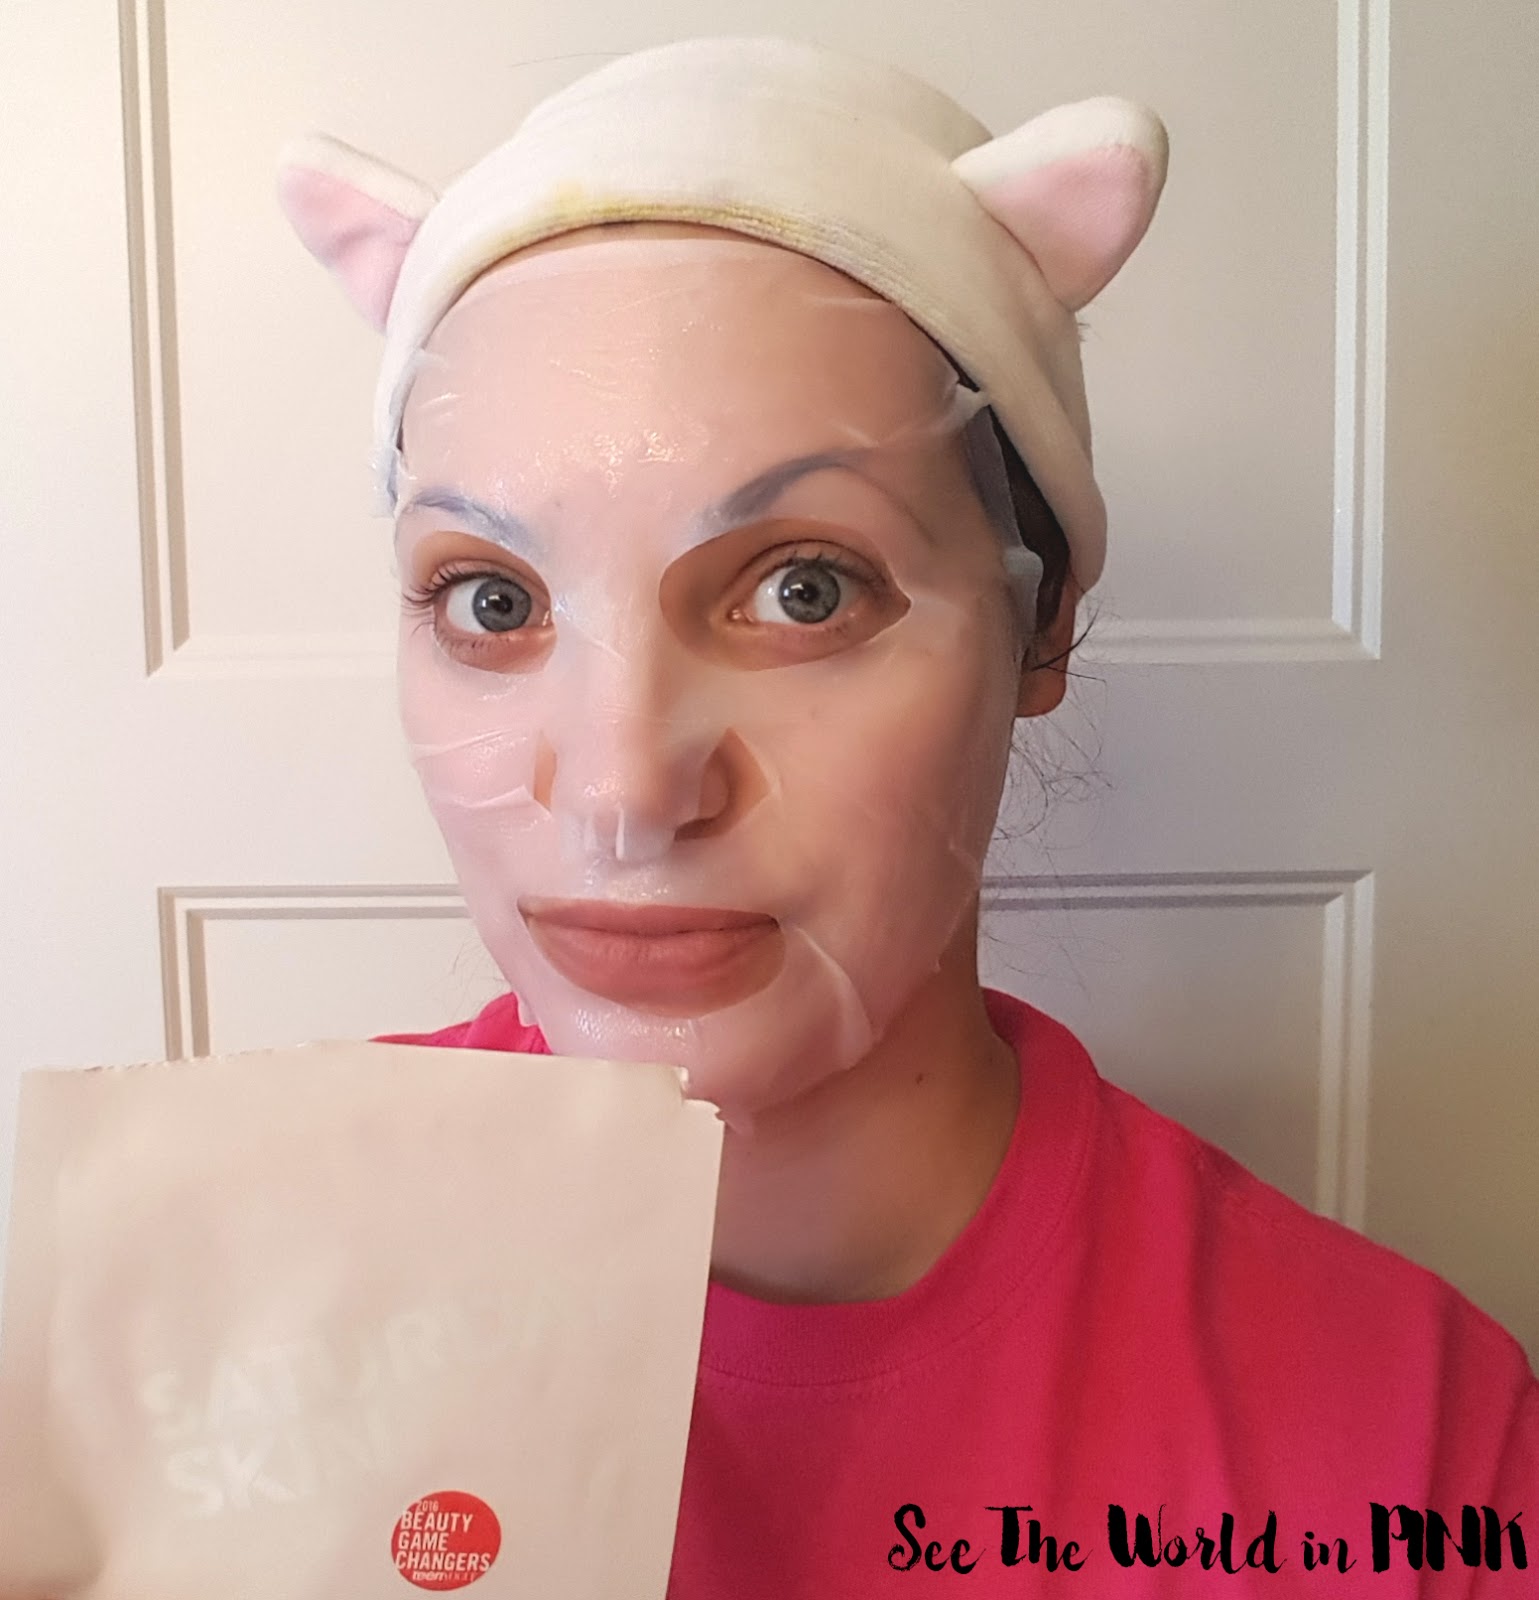 Mask Wednesday - Saturday Skin Spotlight Brightening Mask Try-on and Review! 